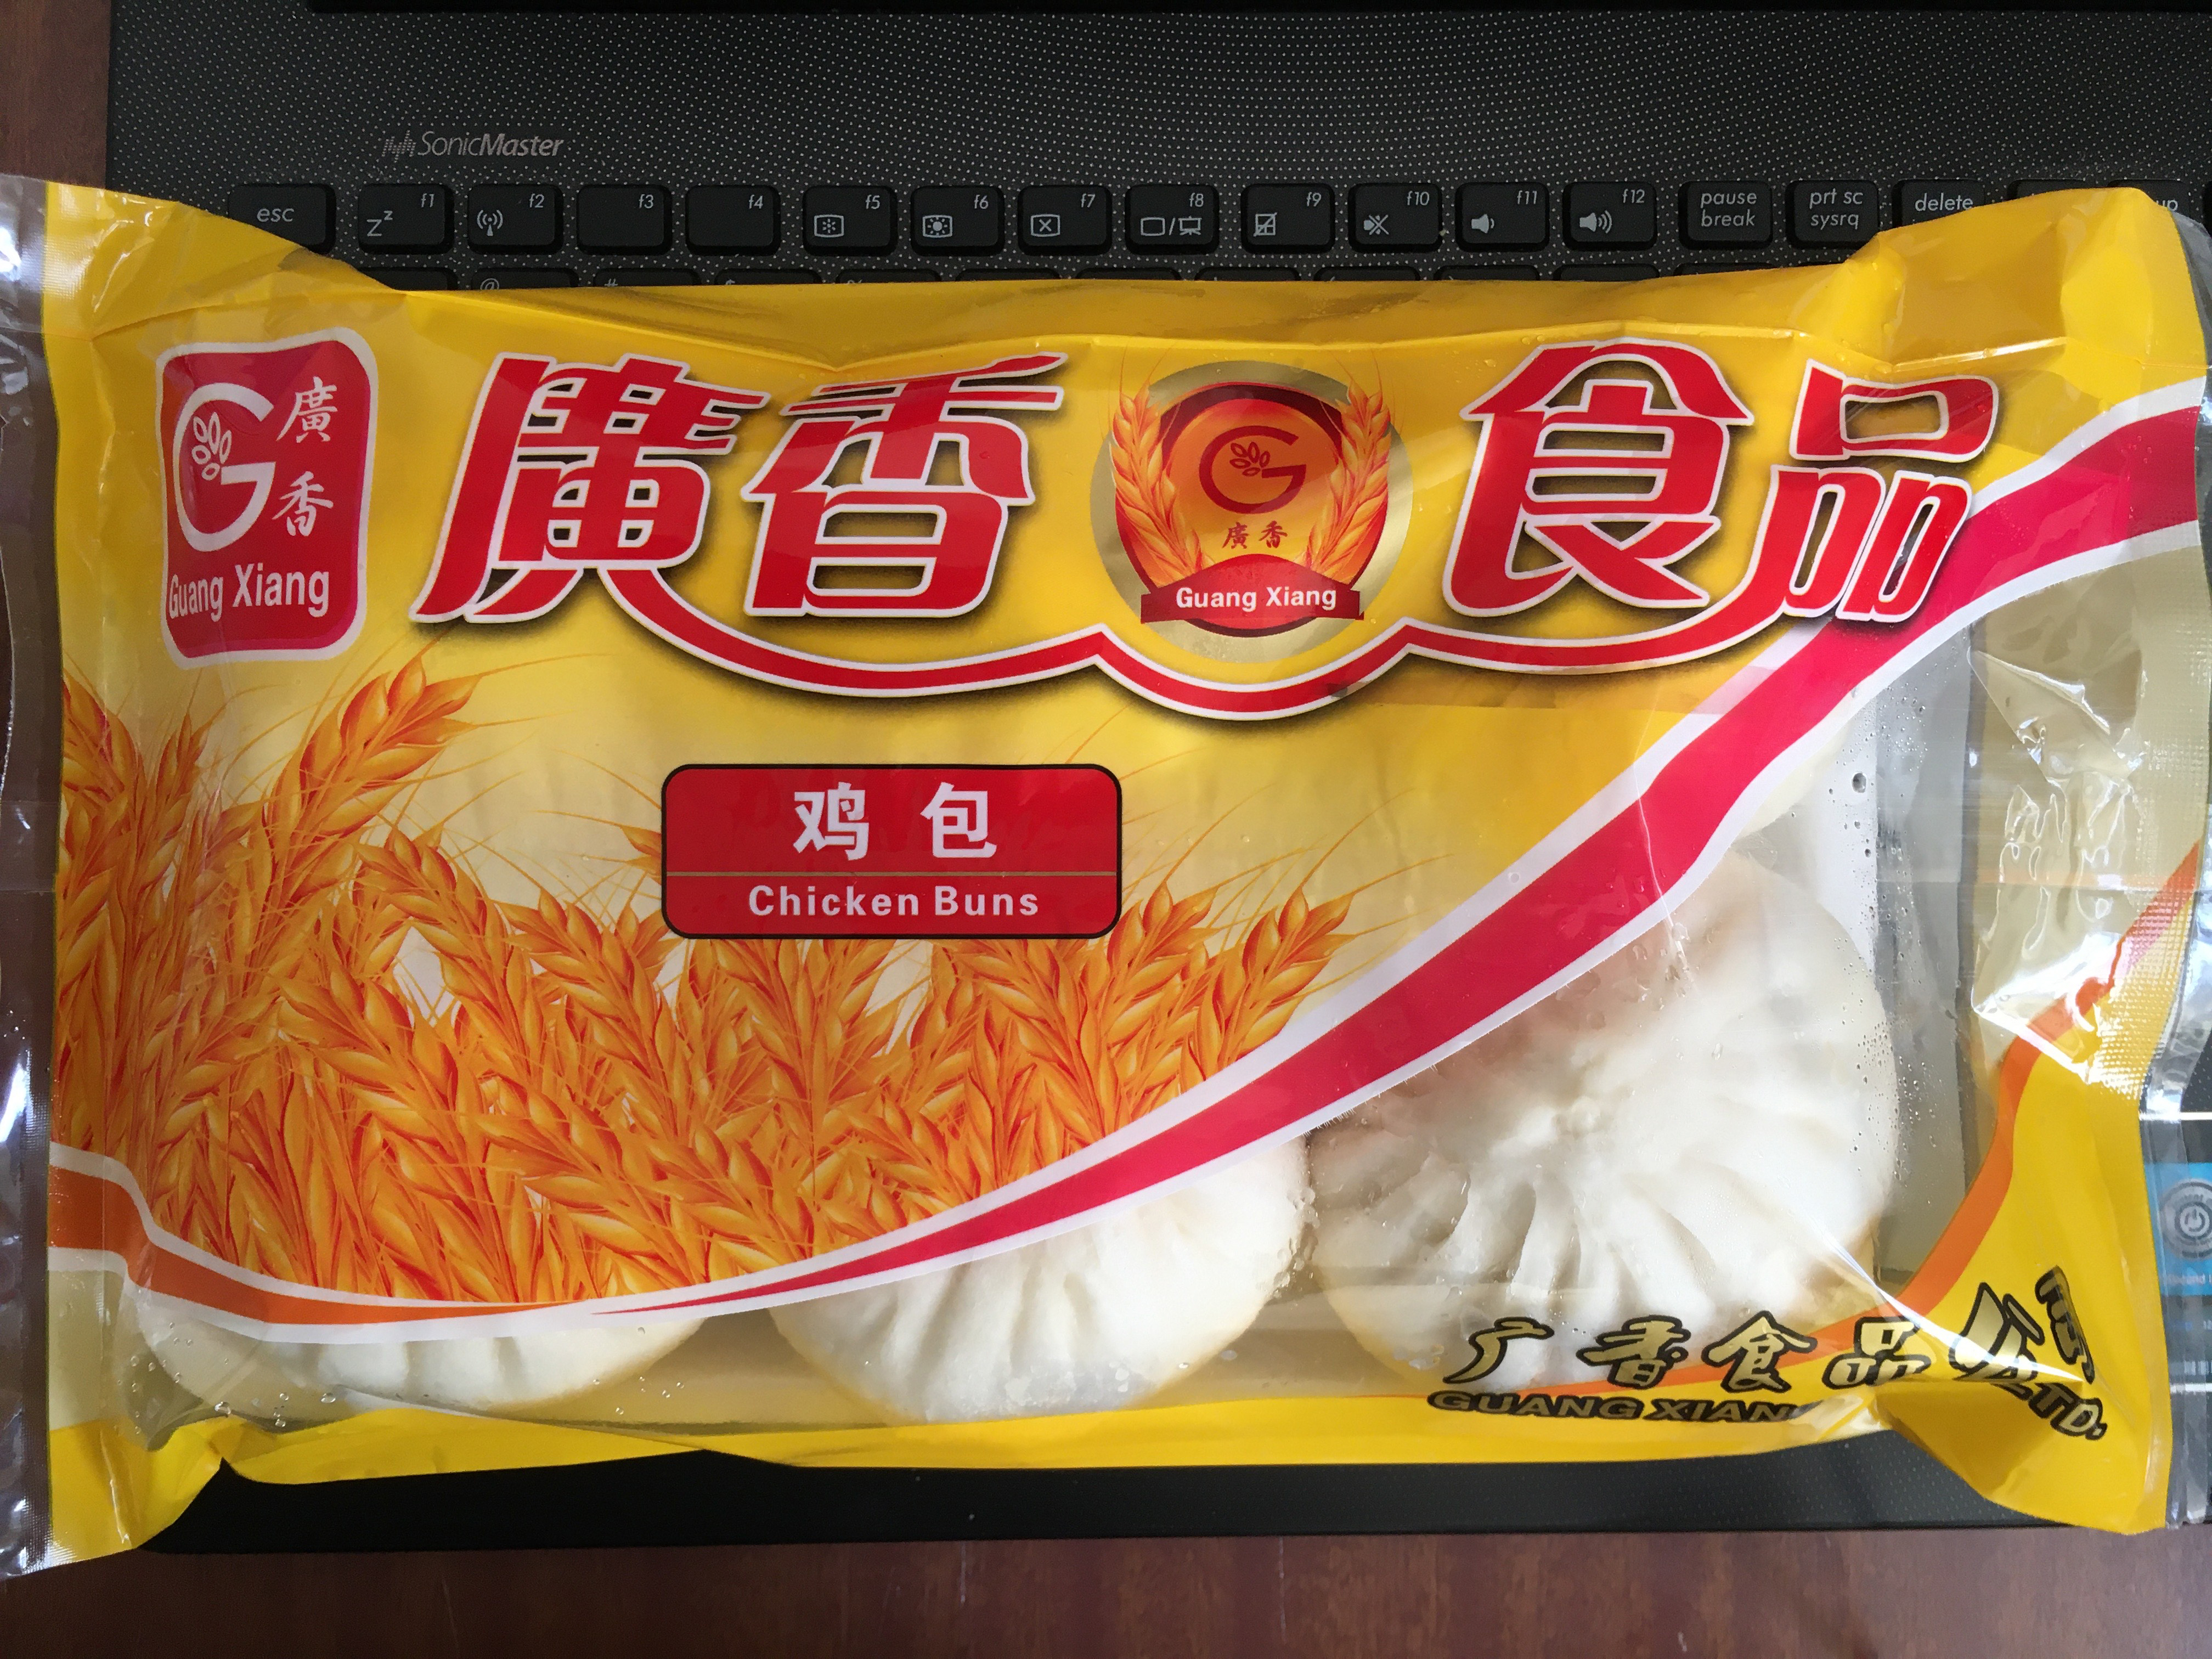 Image of Guangxiang brand Chicken Buns (522g) in a plasti pack